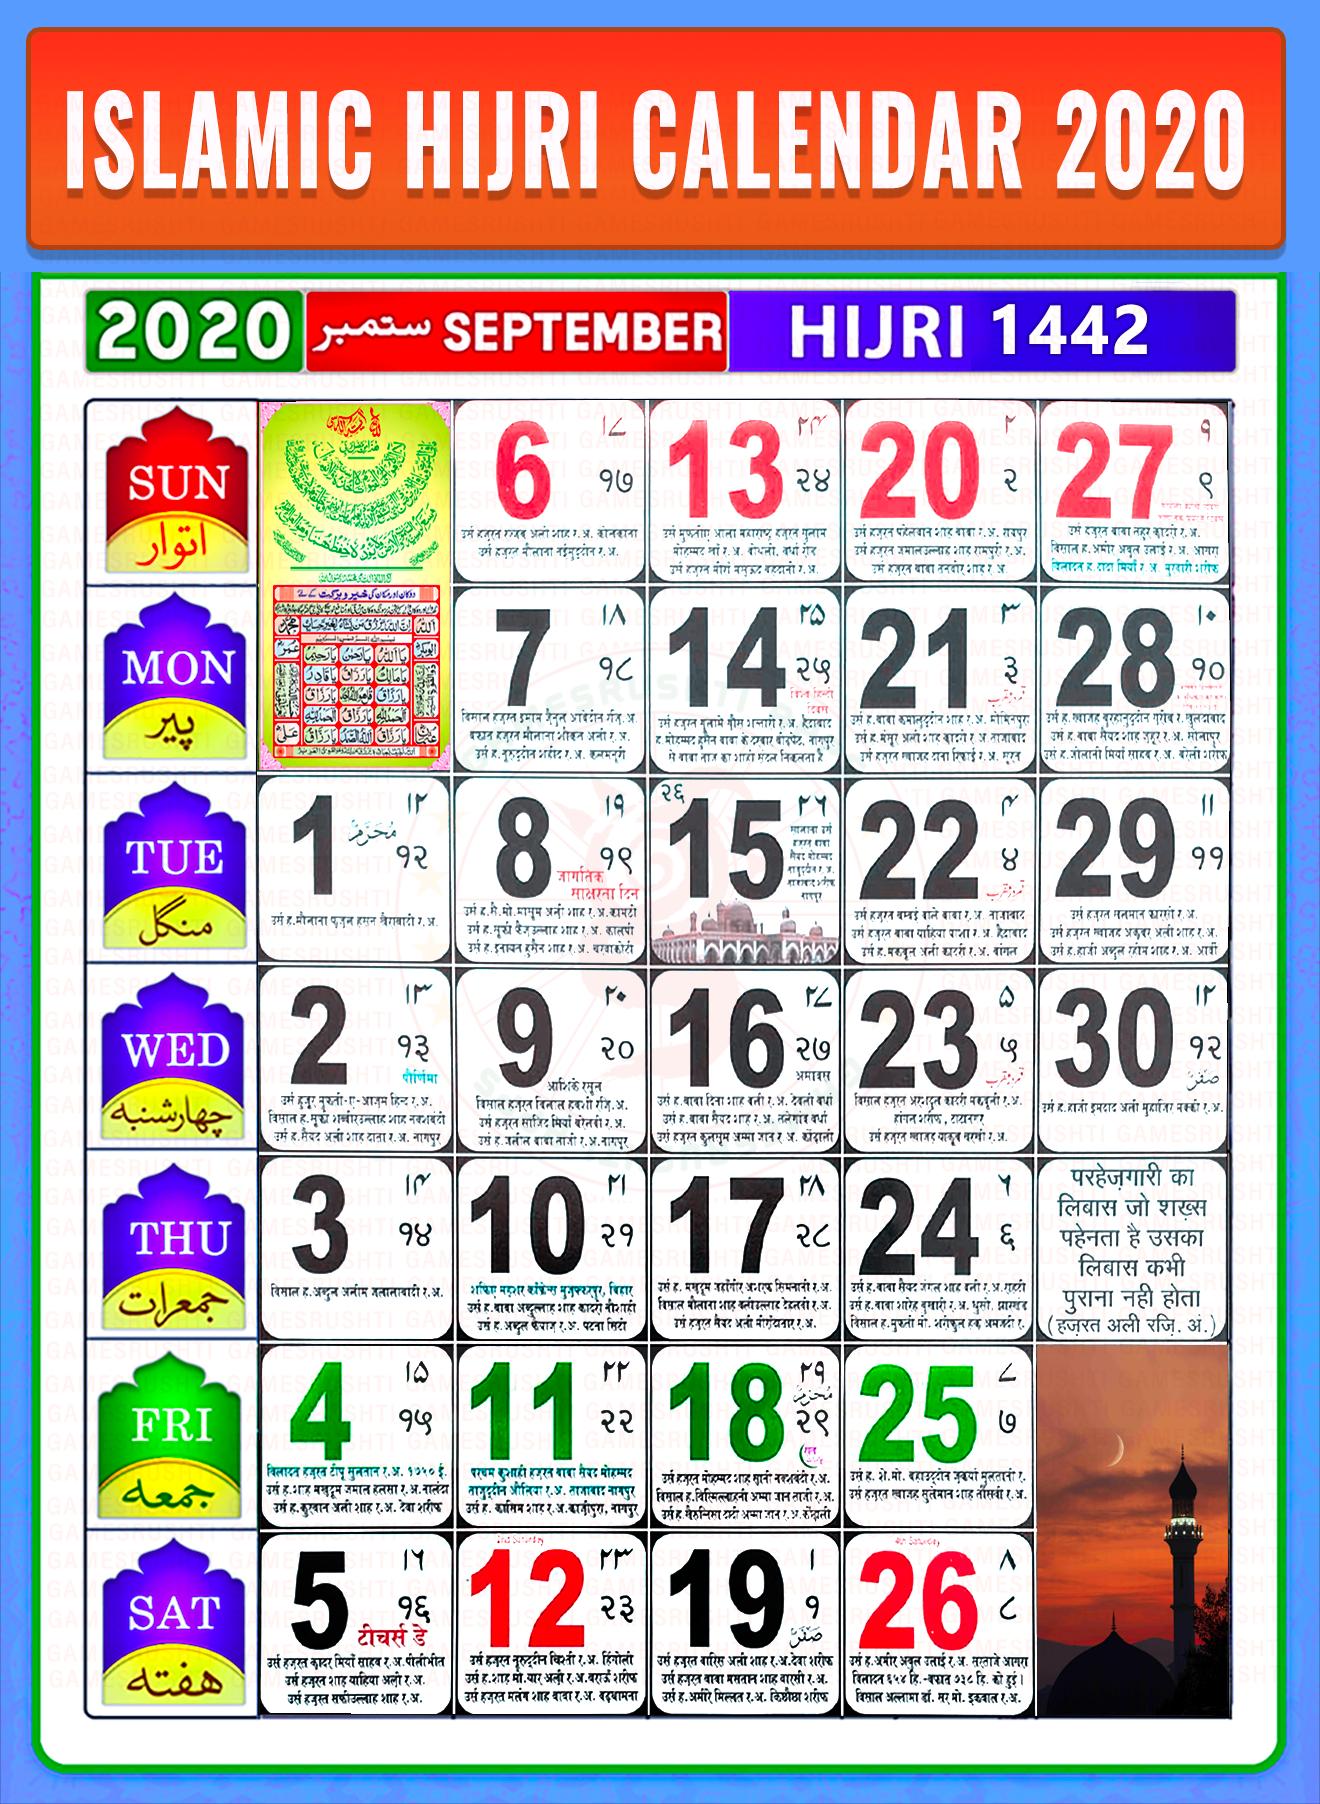 Date Today In Hijri What is the date of islamic calendar today in